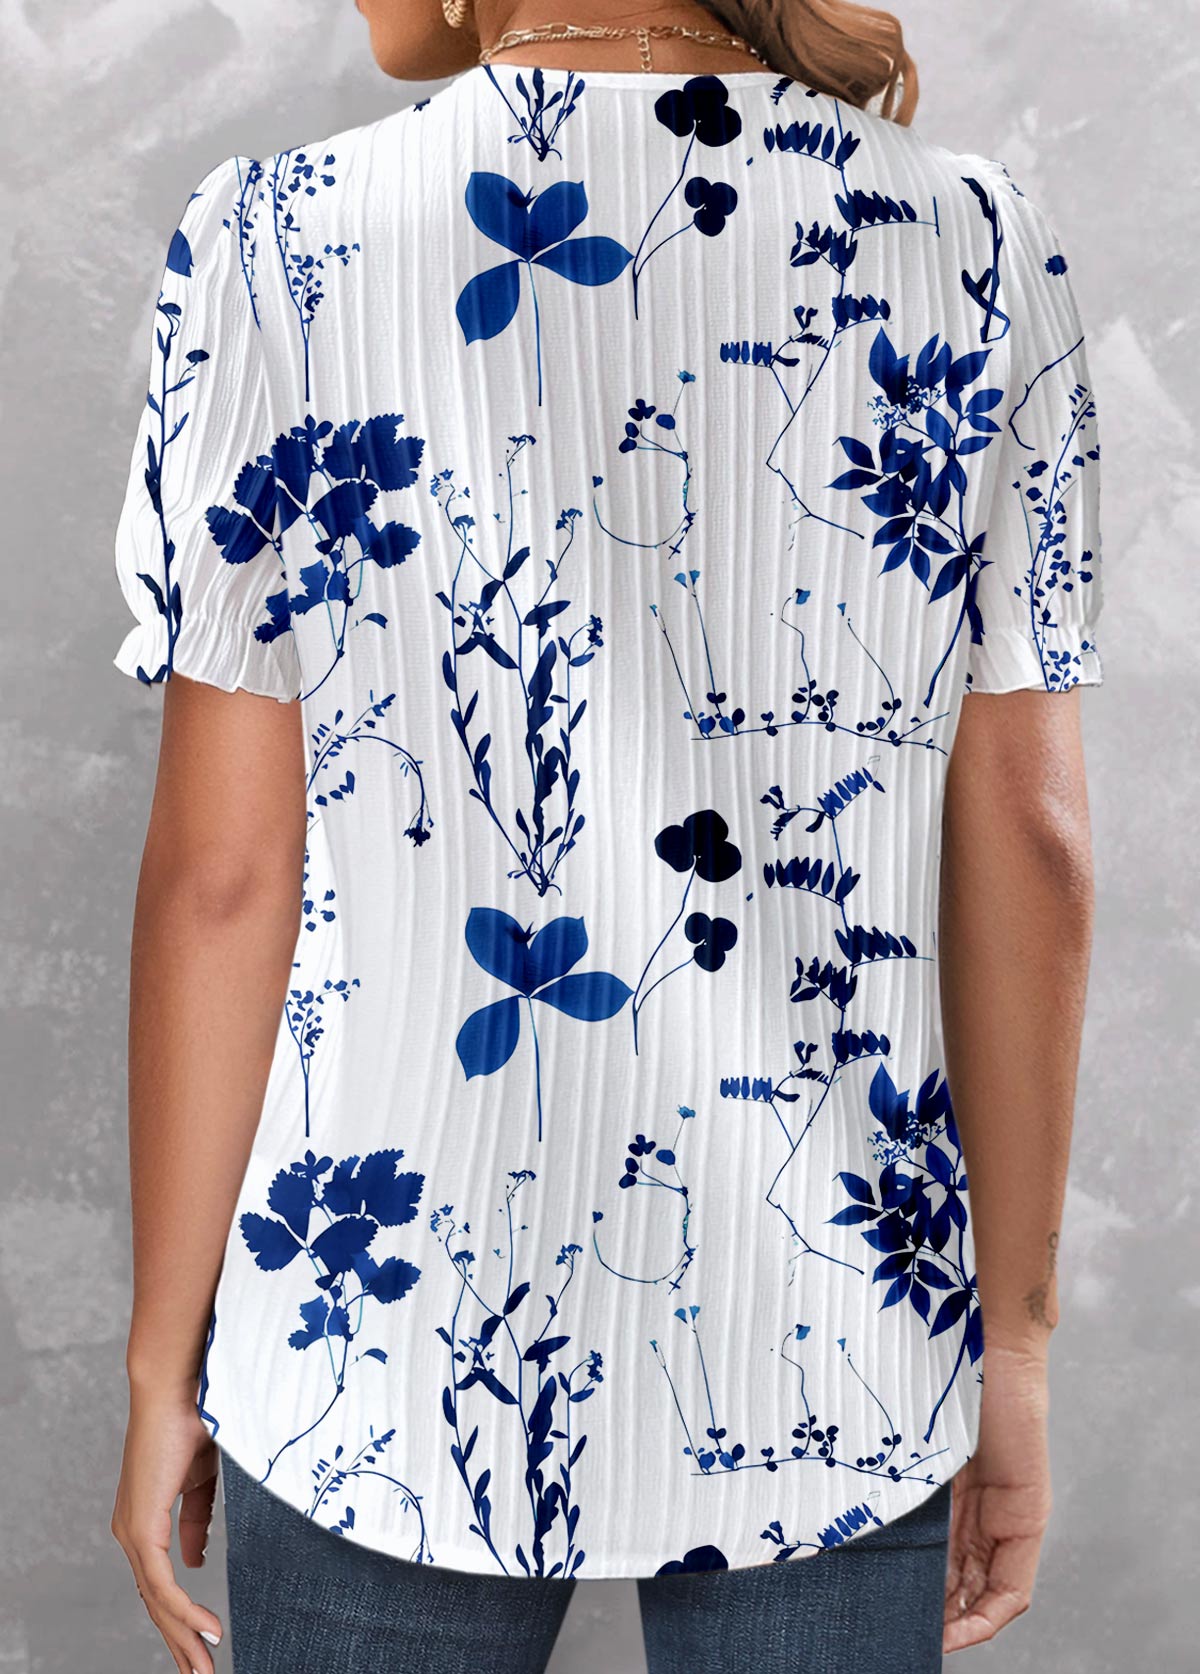 Floral Print Embroidery Dark Blue Short Sleeve Blouse